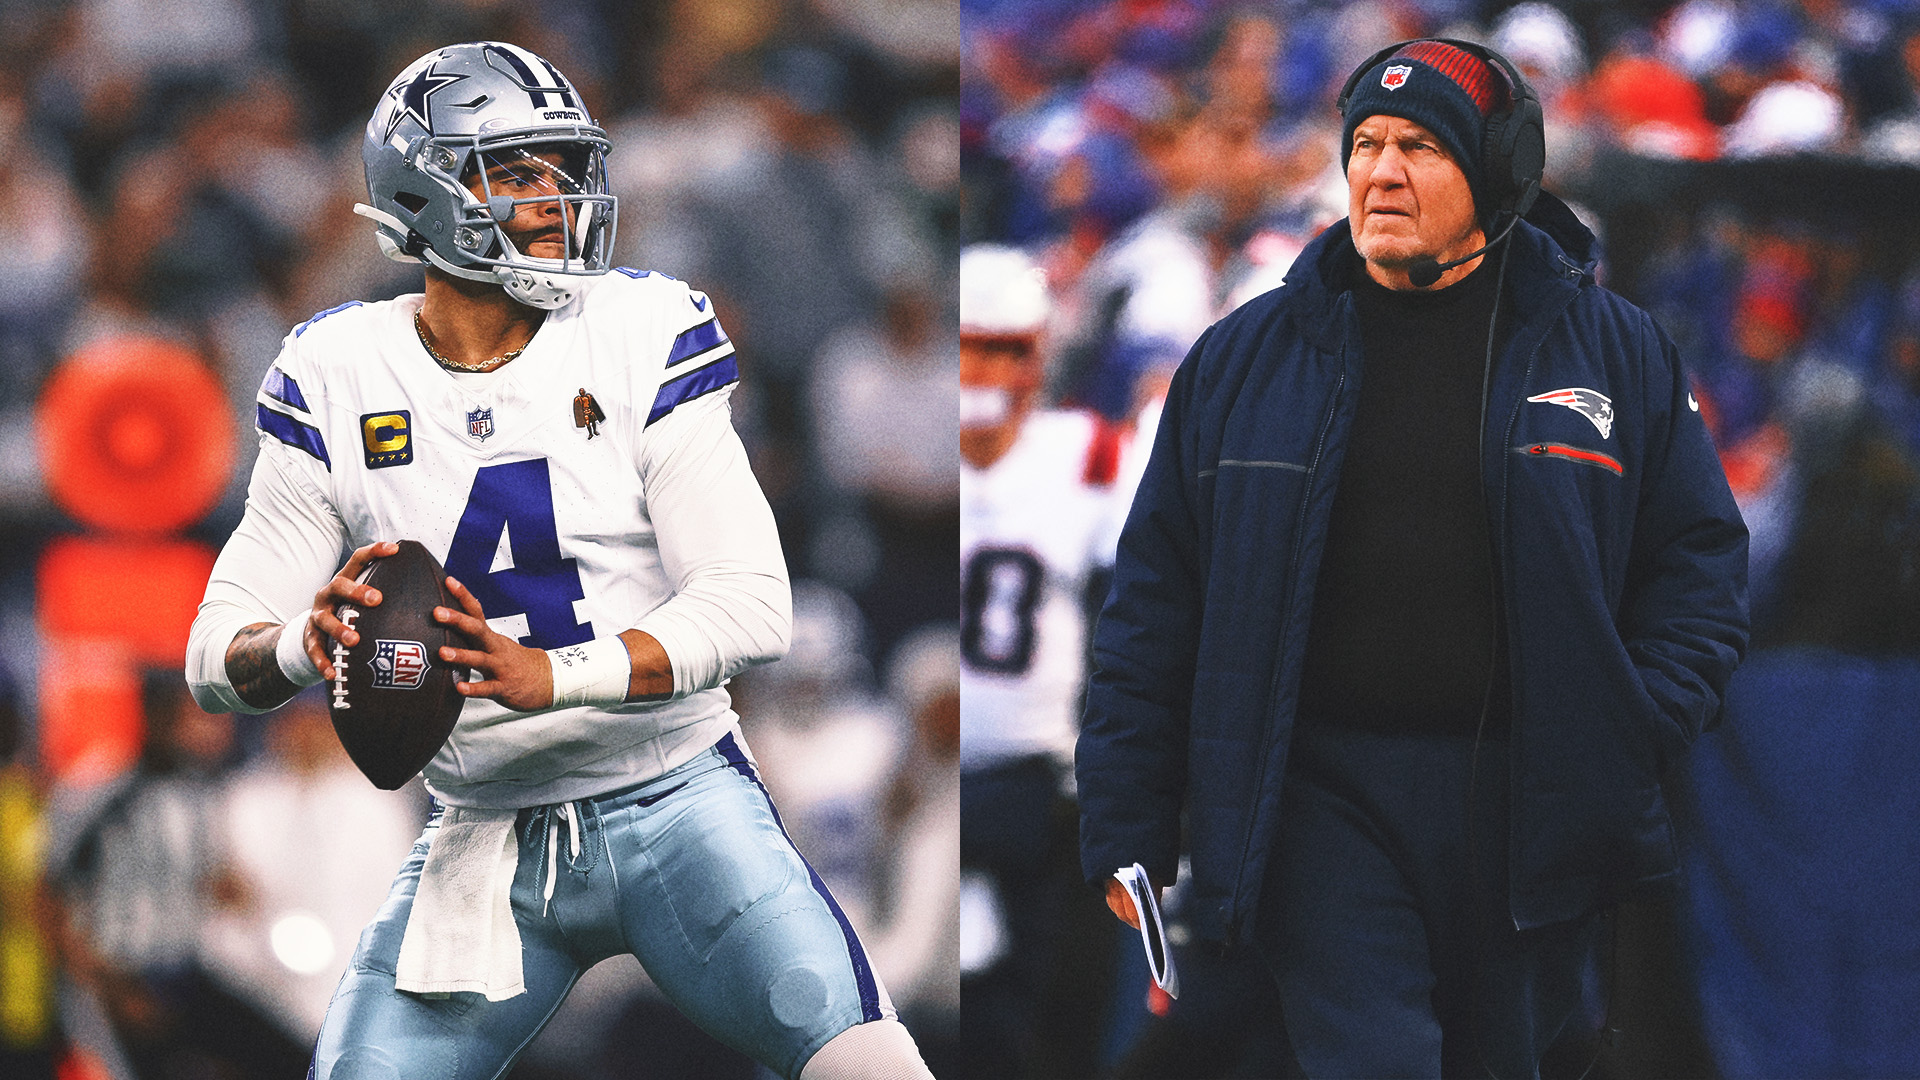 Could Dak Prescott and Bill Belichick team up in 2025 — on the Giants?